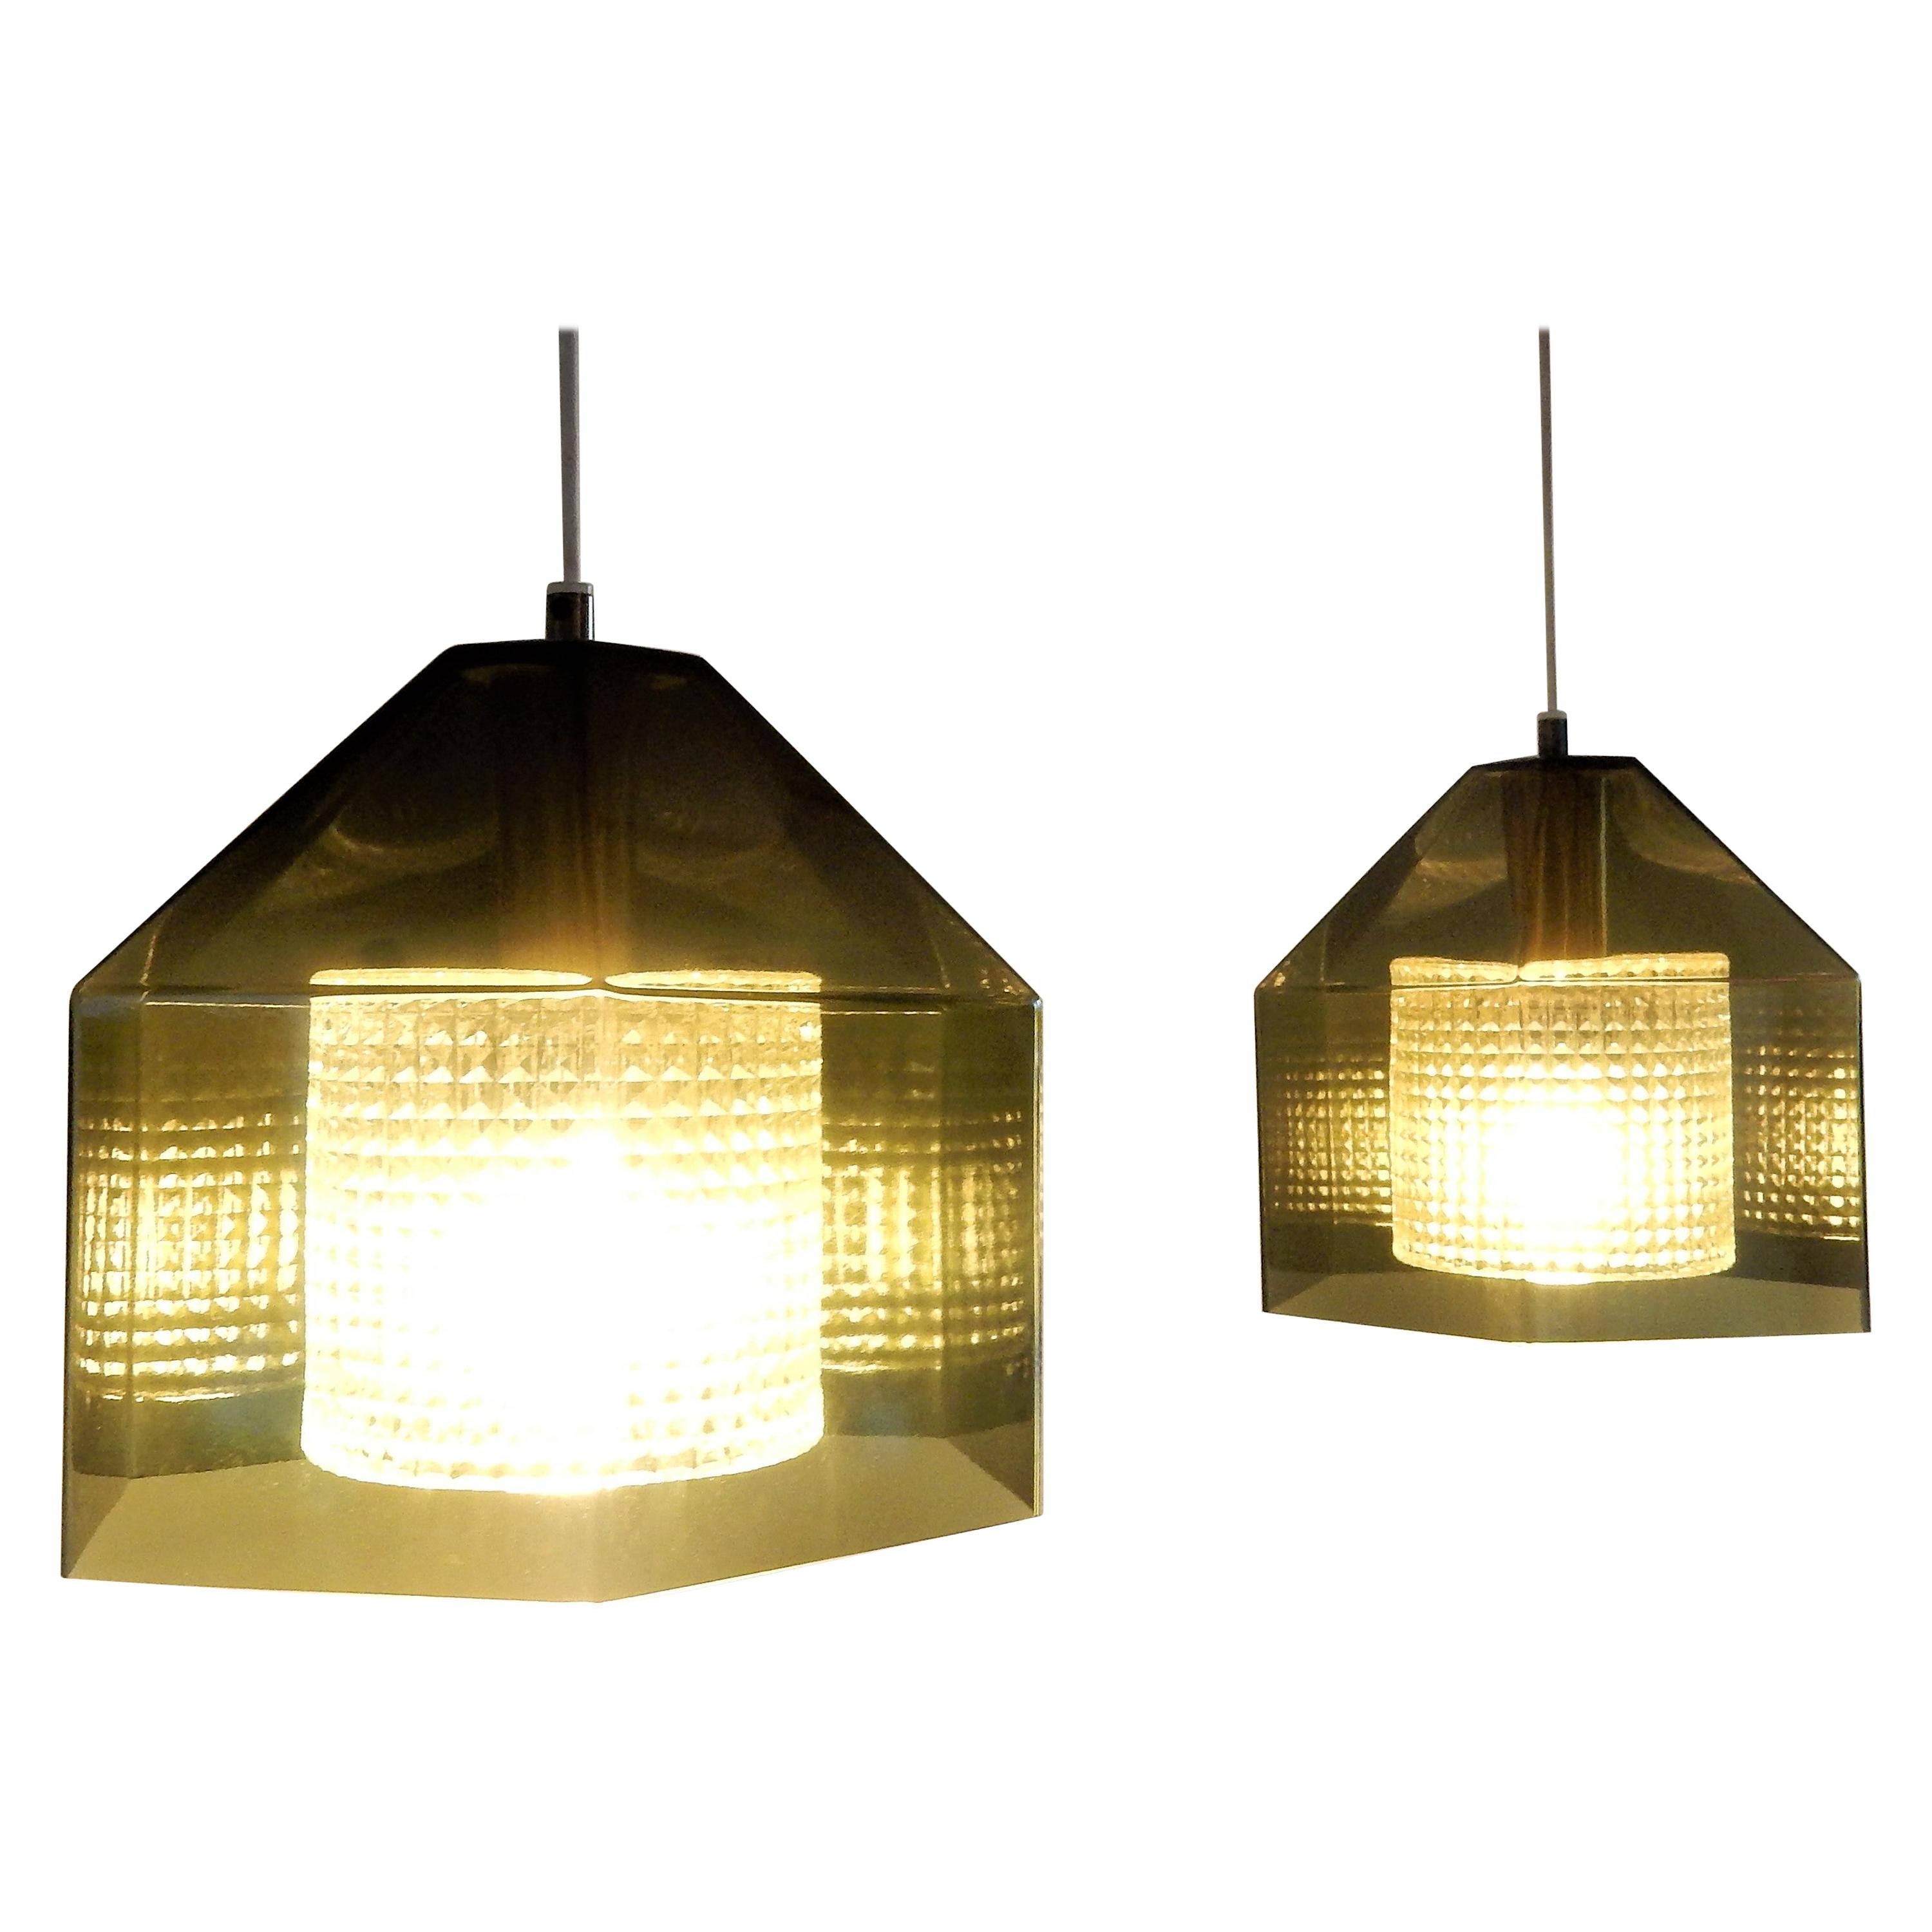 Set of 2 Hexagon Pendant Lamps by Carl Fagerlund for Orrefors, Sweden, 1960s